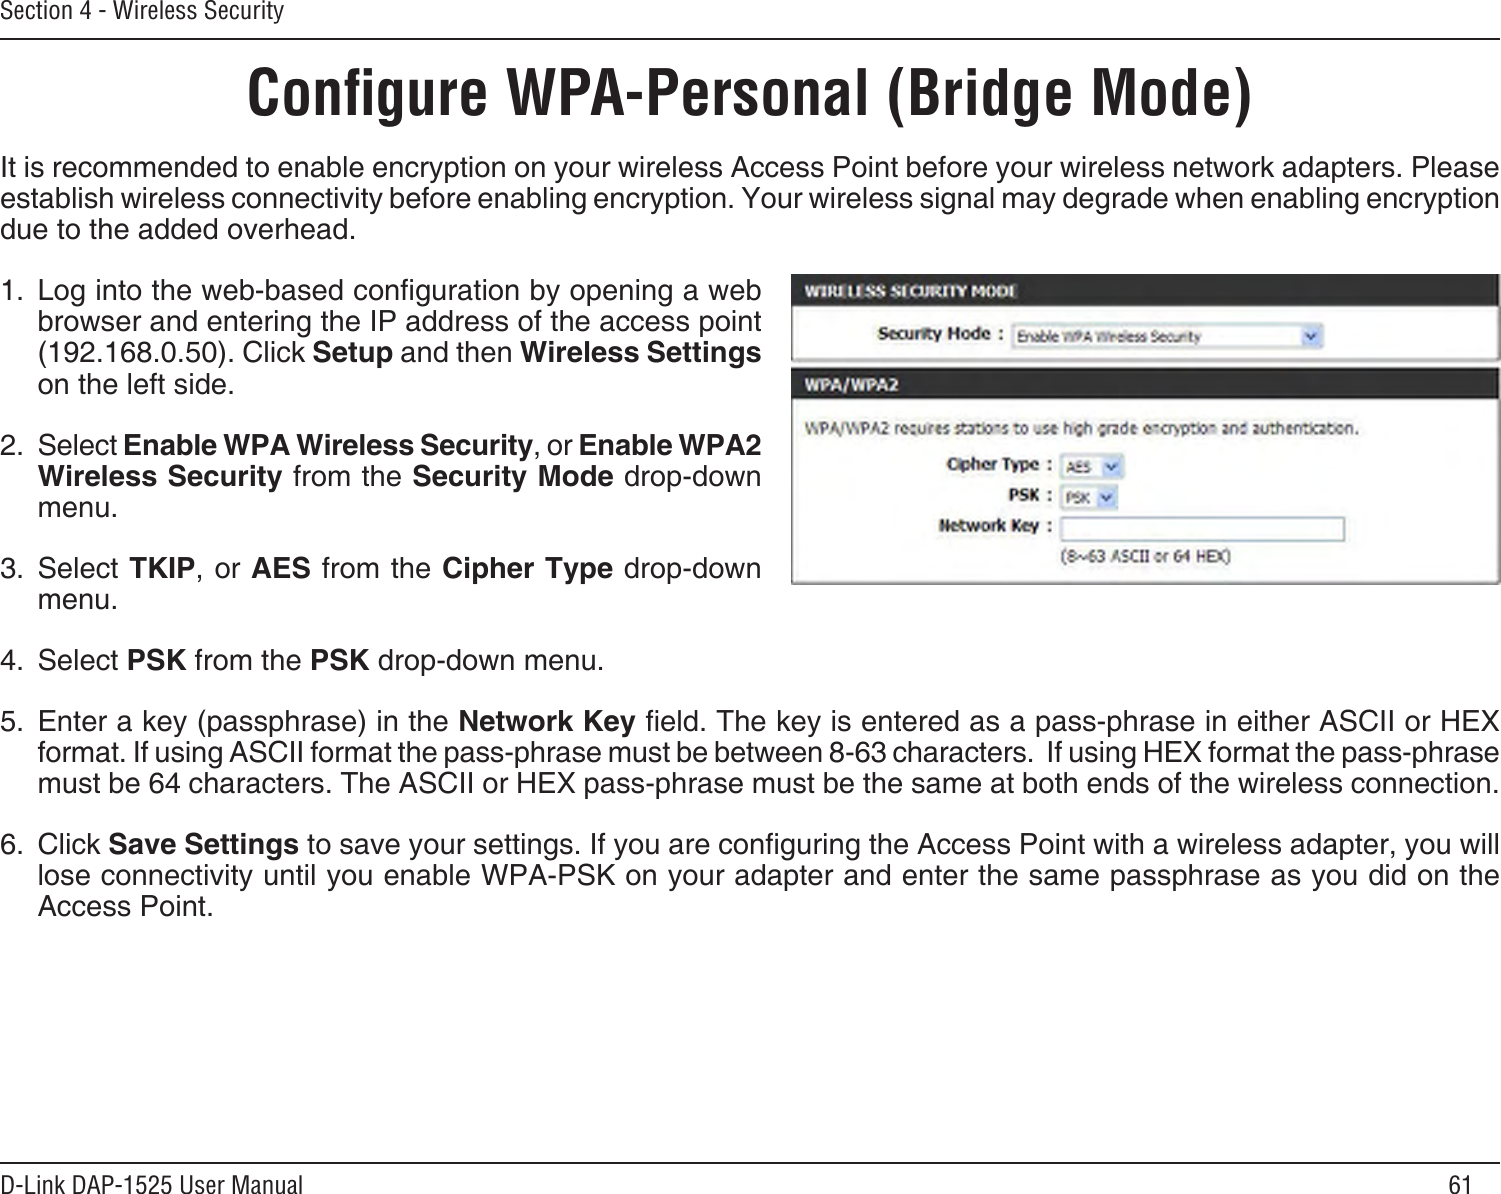 61D-Link DAP-1525 User ManualSection 4 - Wireless SecurityConﬁgure WPA-Personal (Bridge Mode)It is recommended to enable encryption on your wireless Access Point before your wireless network adapters. Please establish wireless connectivity before enabling encryption. Your wireless signal may degrade when enabling encryption due to the added overhead.1.  Log into the web-based conguration by opening a web browser and entering the IP address of the access point (192.168.0.50). Click Setup and then Wireless Settings on the left side.2.  Select Enable WPA Wireless Security, or Enable WPA2 Wireless Security from the Security Mode drop-down menu.3.  Select TKIP, or AES from the Cipher Type drop-down menu.4.  Select PSK from the PSK drop-down menu.5.  Enter a key (passphrase) in the Network Key eld. The key is entered as a pass-phrase in either ASCII or HEX format. If using ASCII format the pass-phrase must be between 8-63 characters.  If using HEX format the pass-phrase must be 64 characters. The ASCII or HEX pass-phrase must be the same at both ends of the wireless connection.6.  Click Save Settings to save your settings. If you are conguring the Access Point with a wireless adapter, you will lose connectivity until you enable WPA-PSK on your adapter and enter the same passphrase as you did on the Access Point.